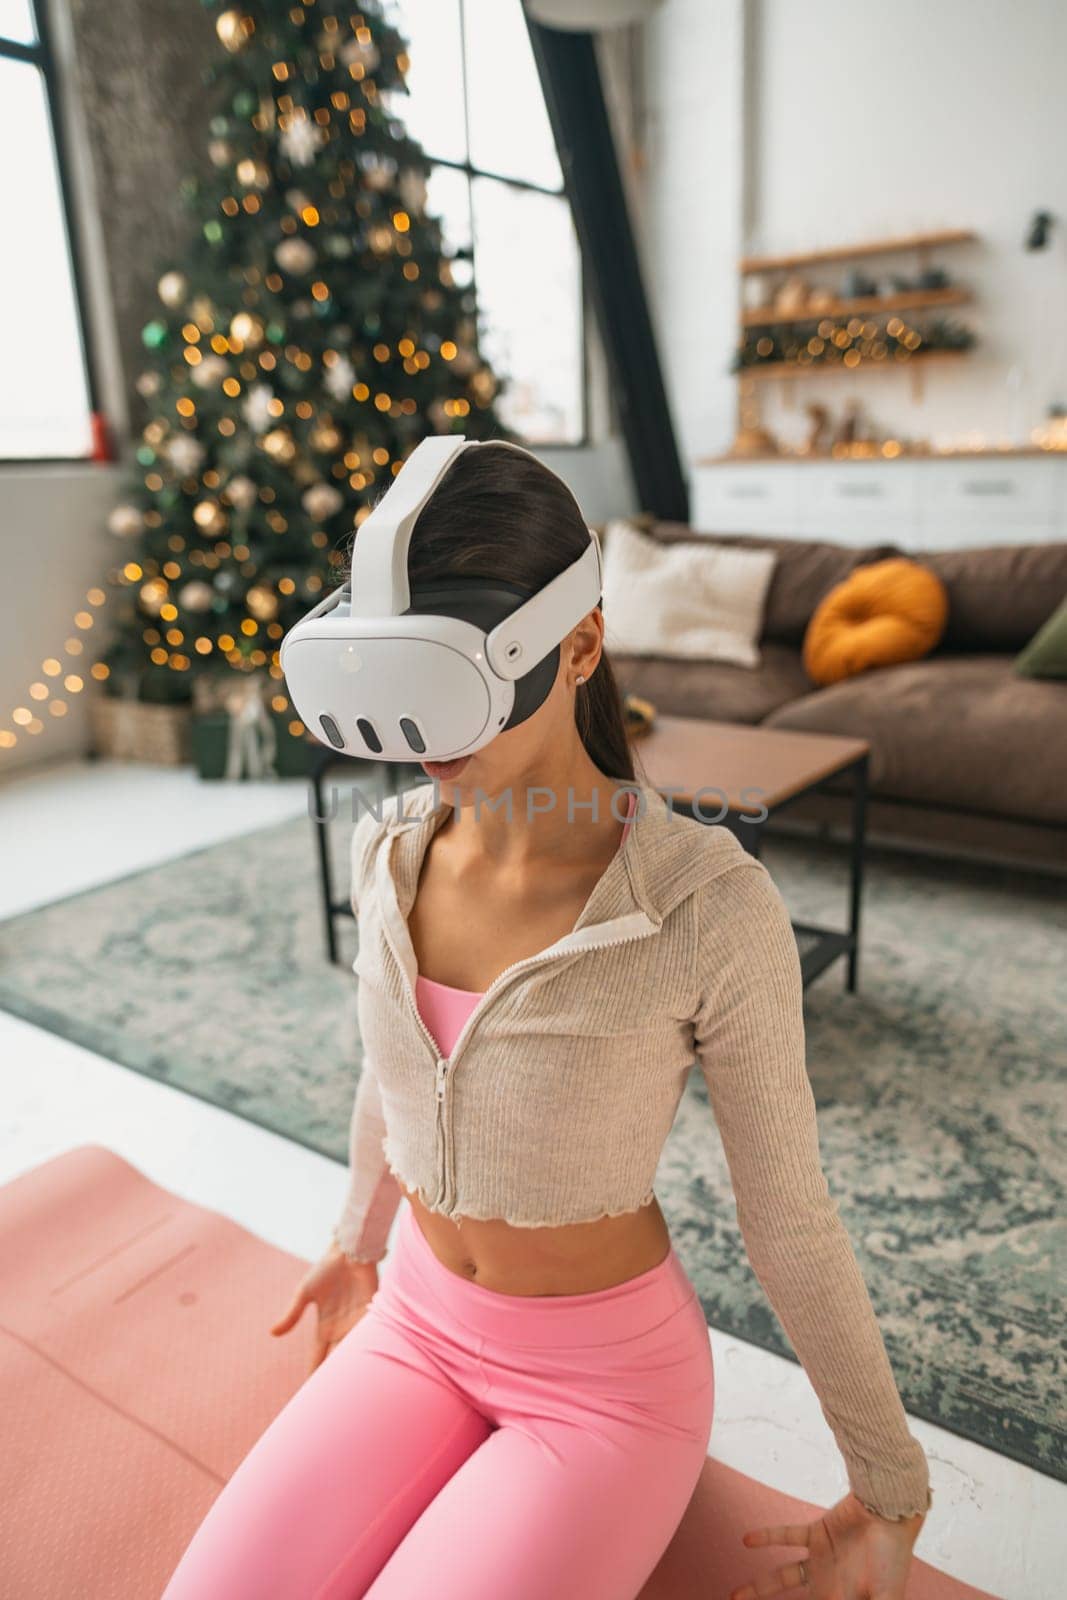 During the New Year festivities, a yoga instructor hosts online training sessions using a virtual reality headset. by teksomolika